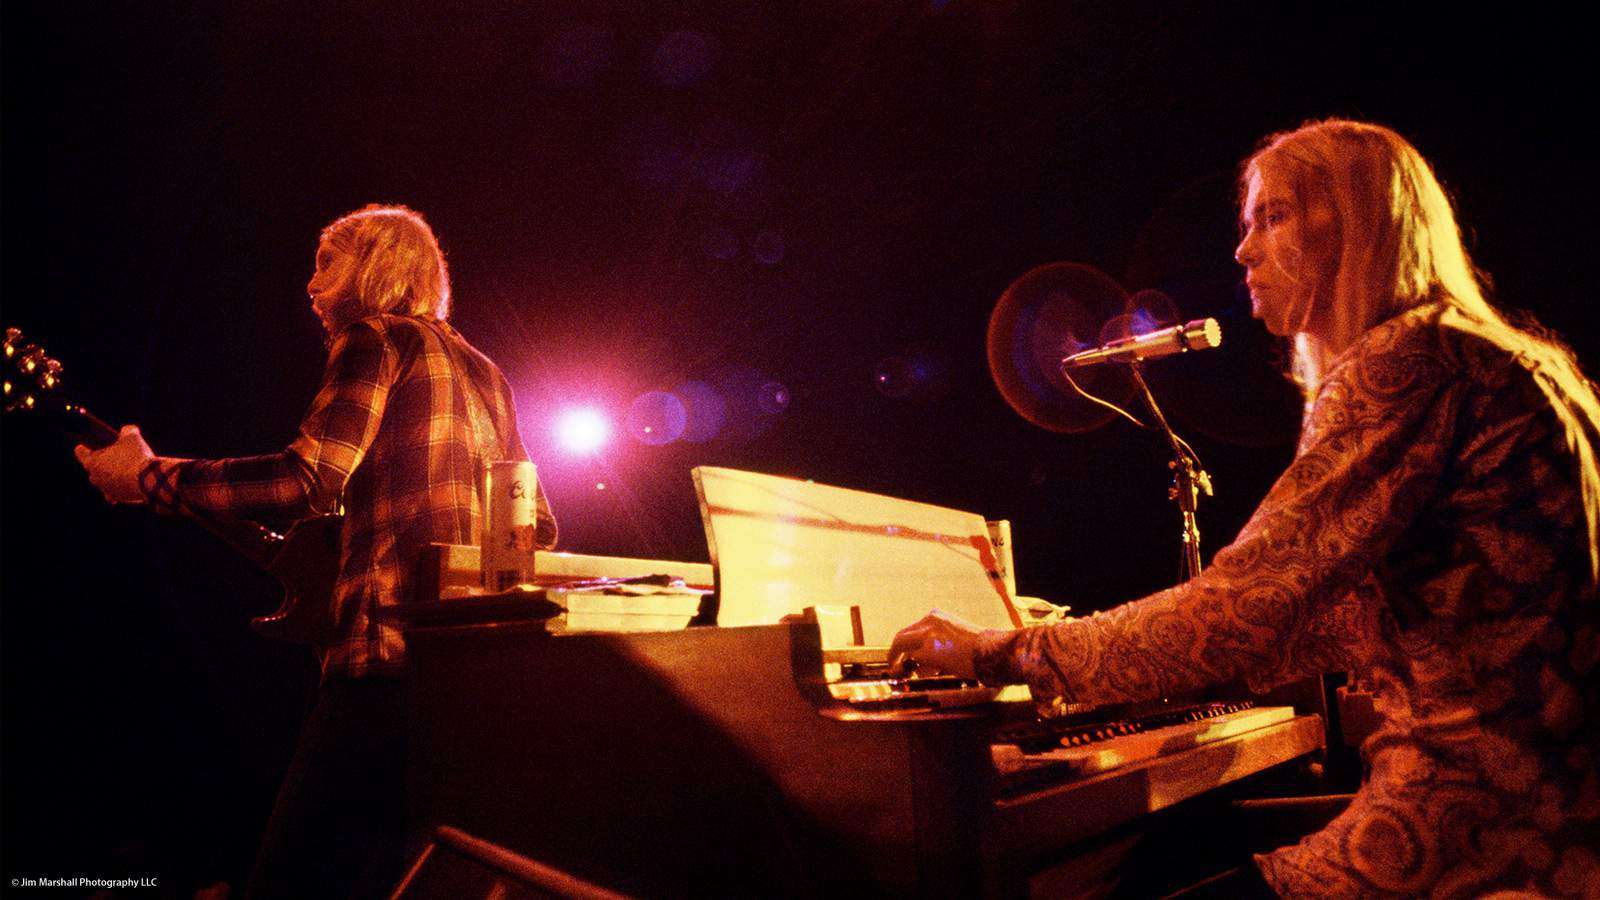 Allman Brothers Duane and Gregg, 1971